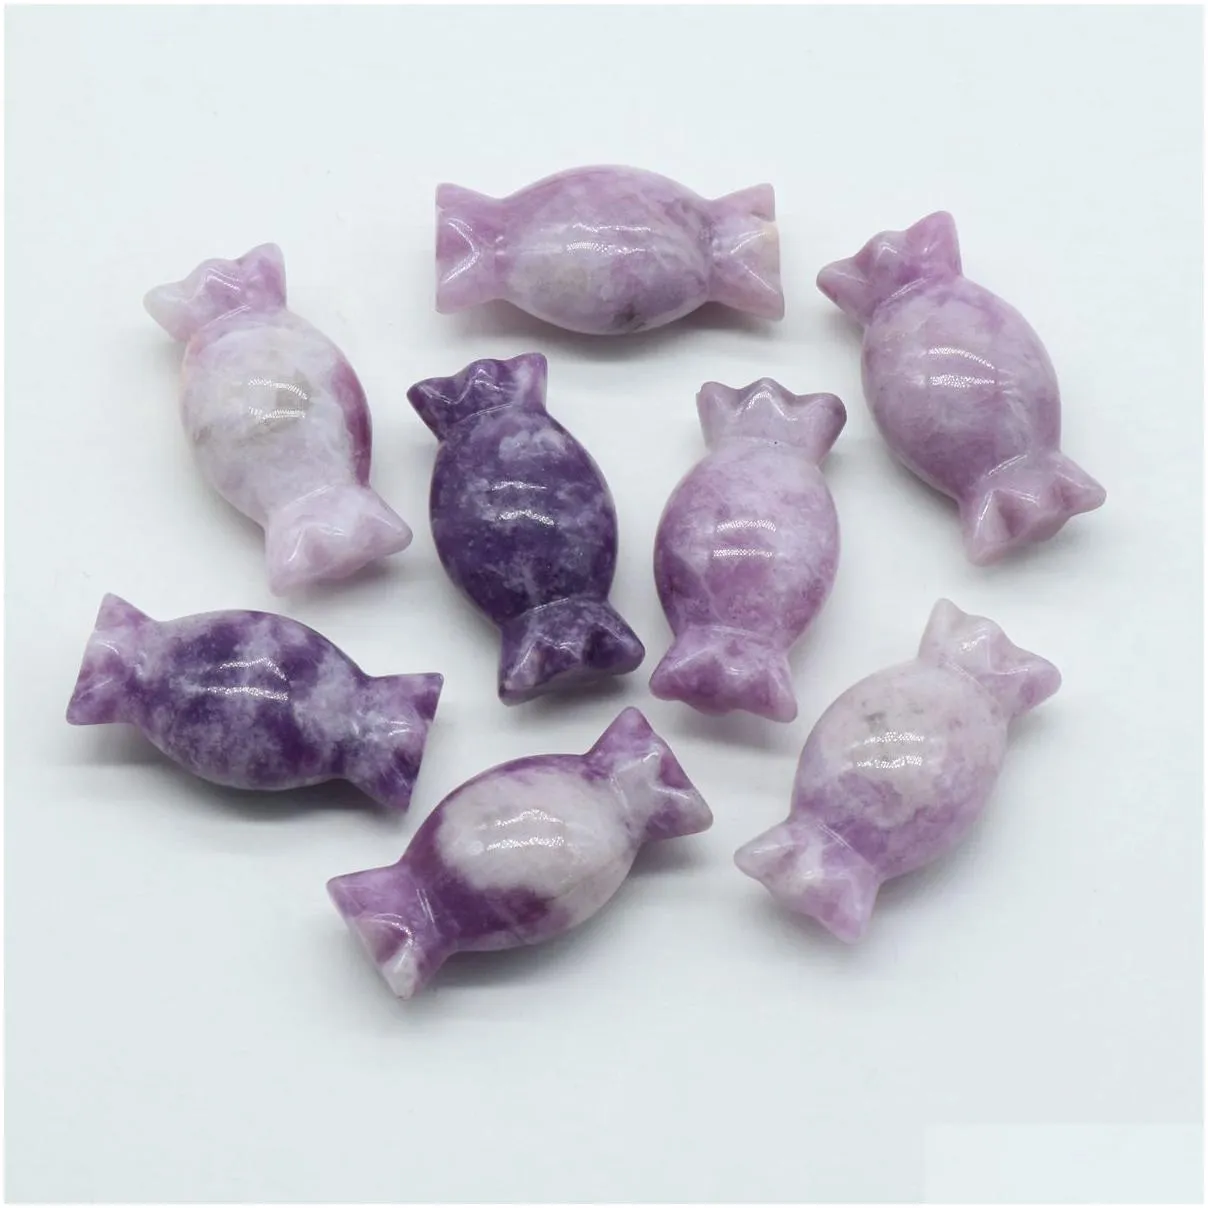 Natural Crystal Stone Carving Festival Candy Gift Gemstone Agate Ornaments Folk Arts Healing Energy For Decorate